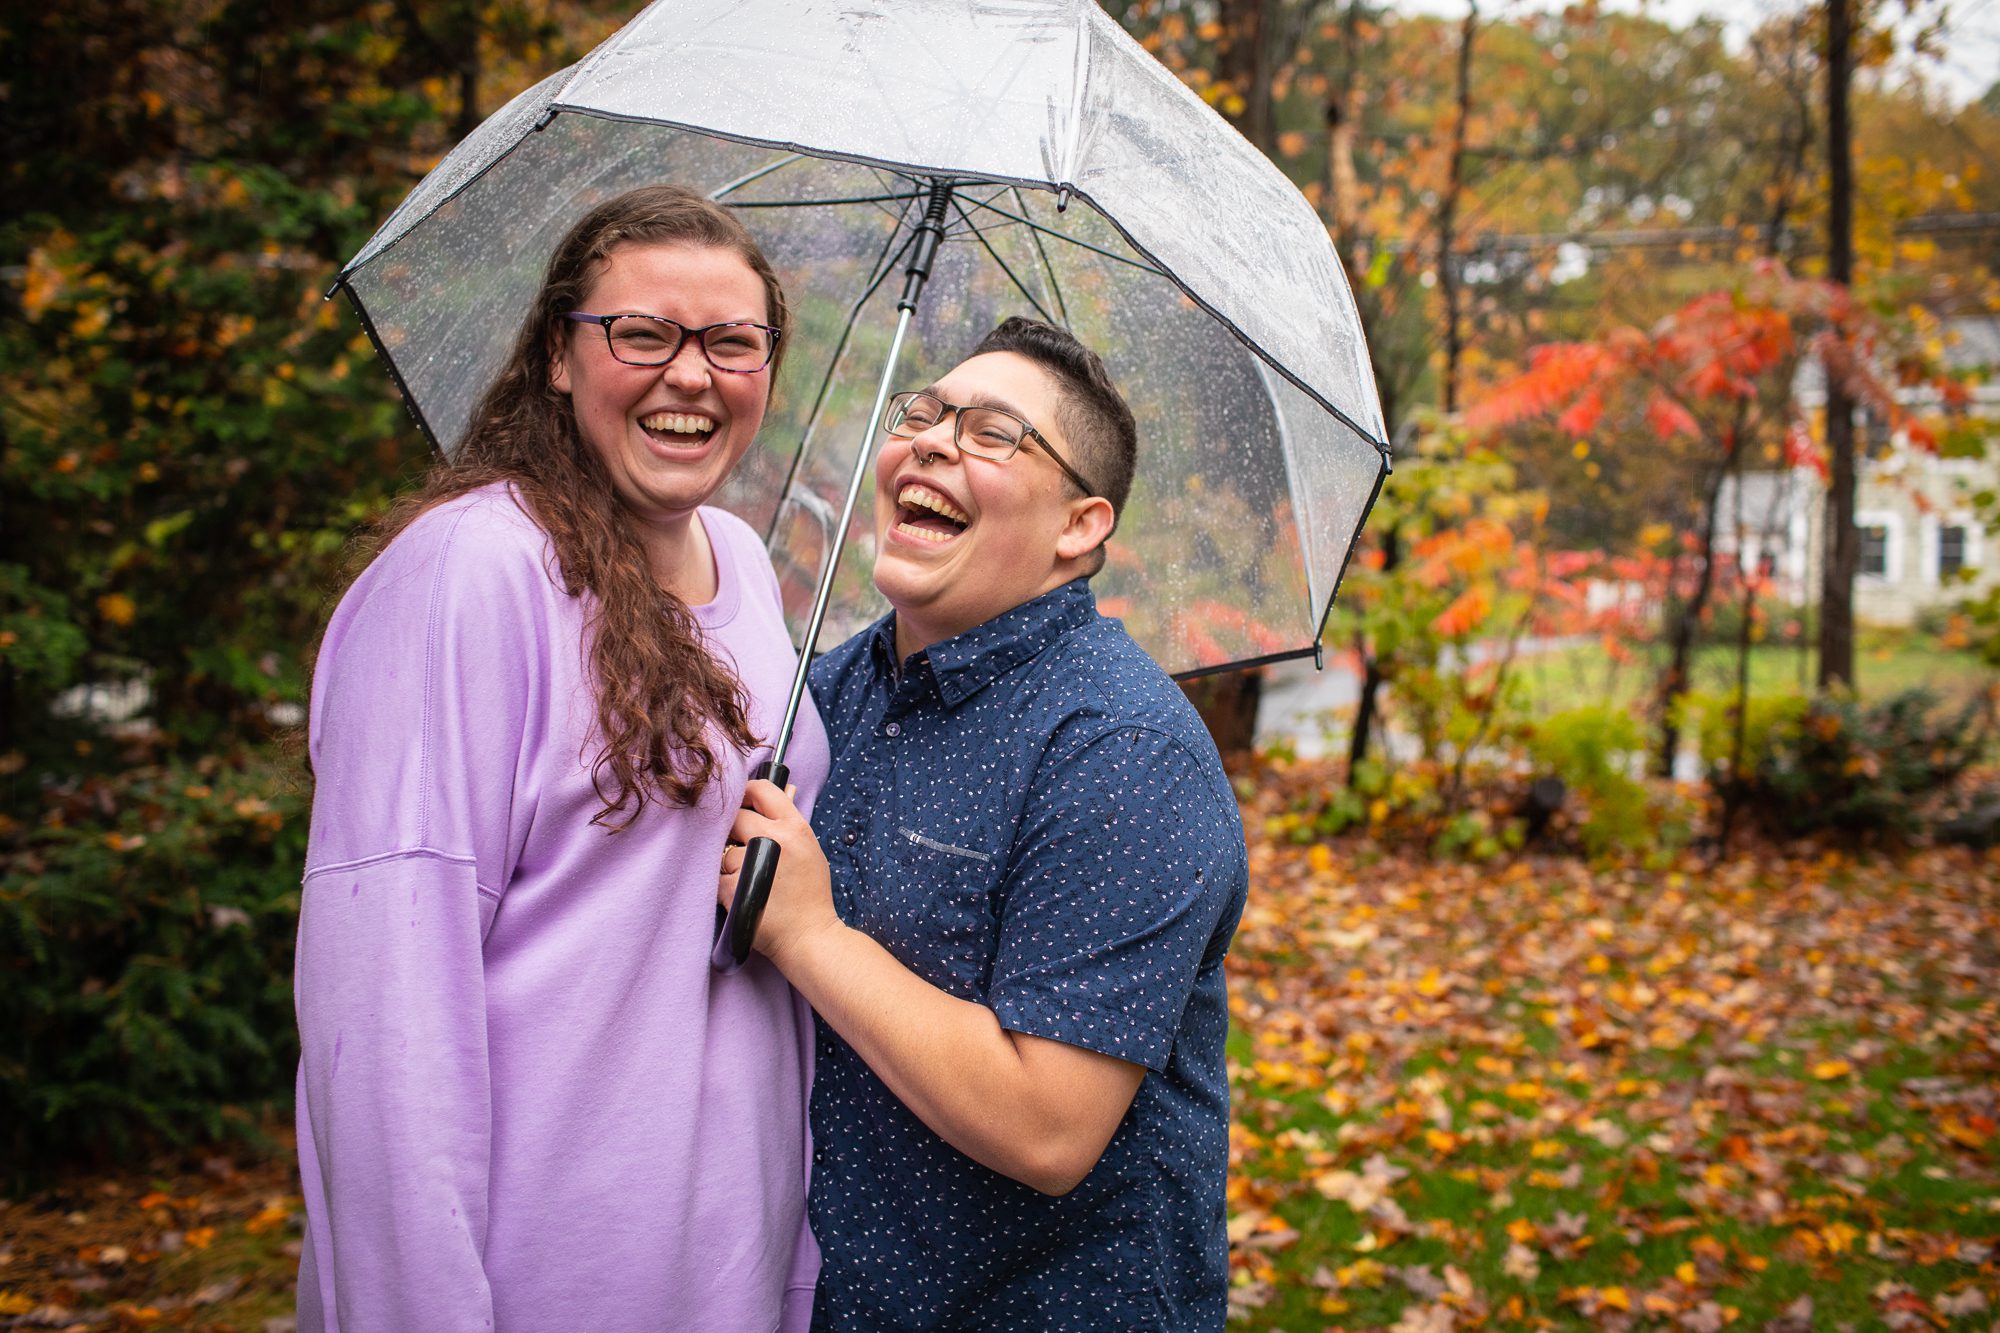 Central MA Engagement Photography Locations same_sex_couple_laughing_in_rain_unbrella_engagement_photos